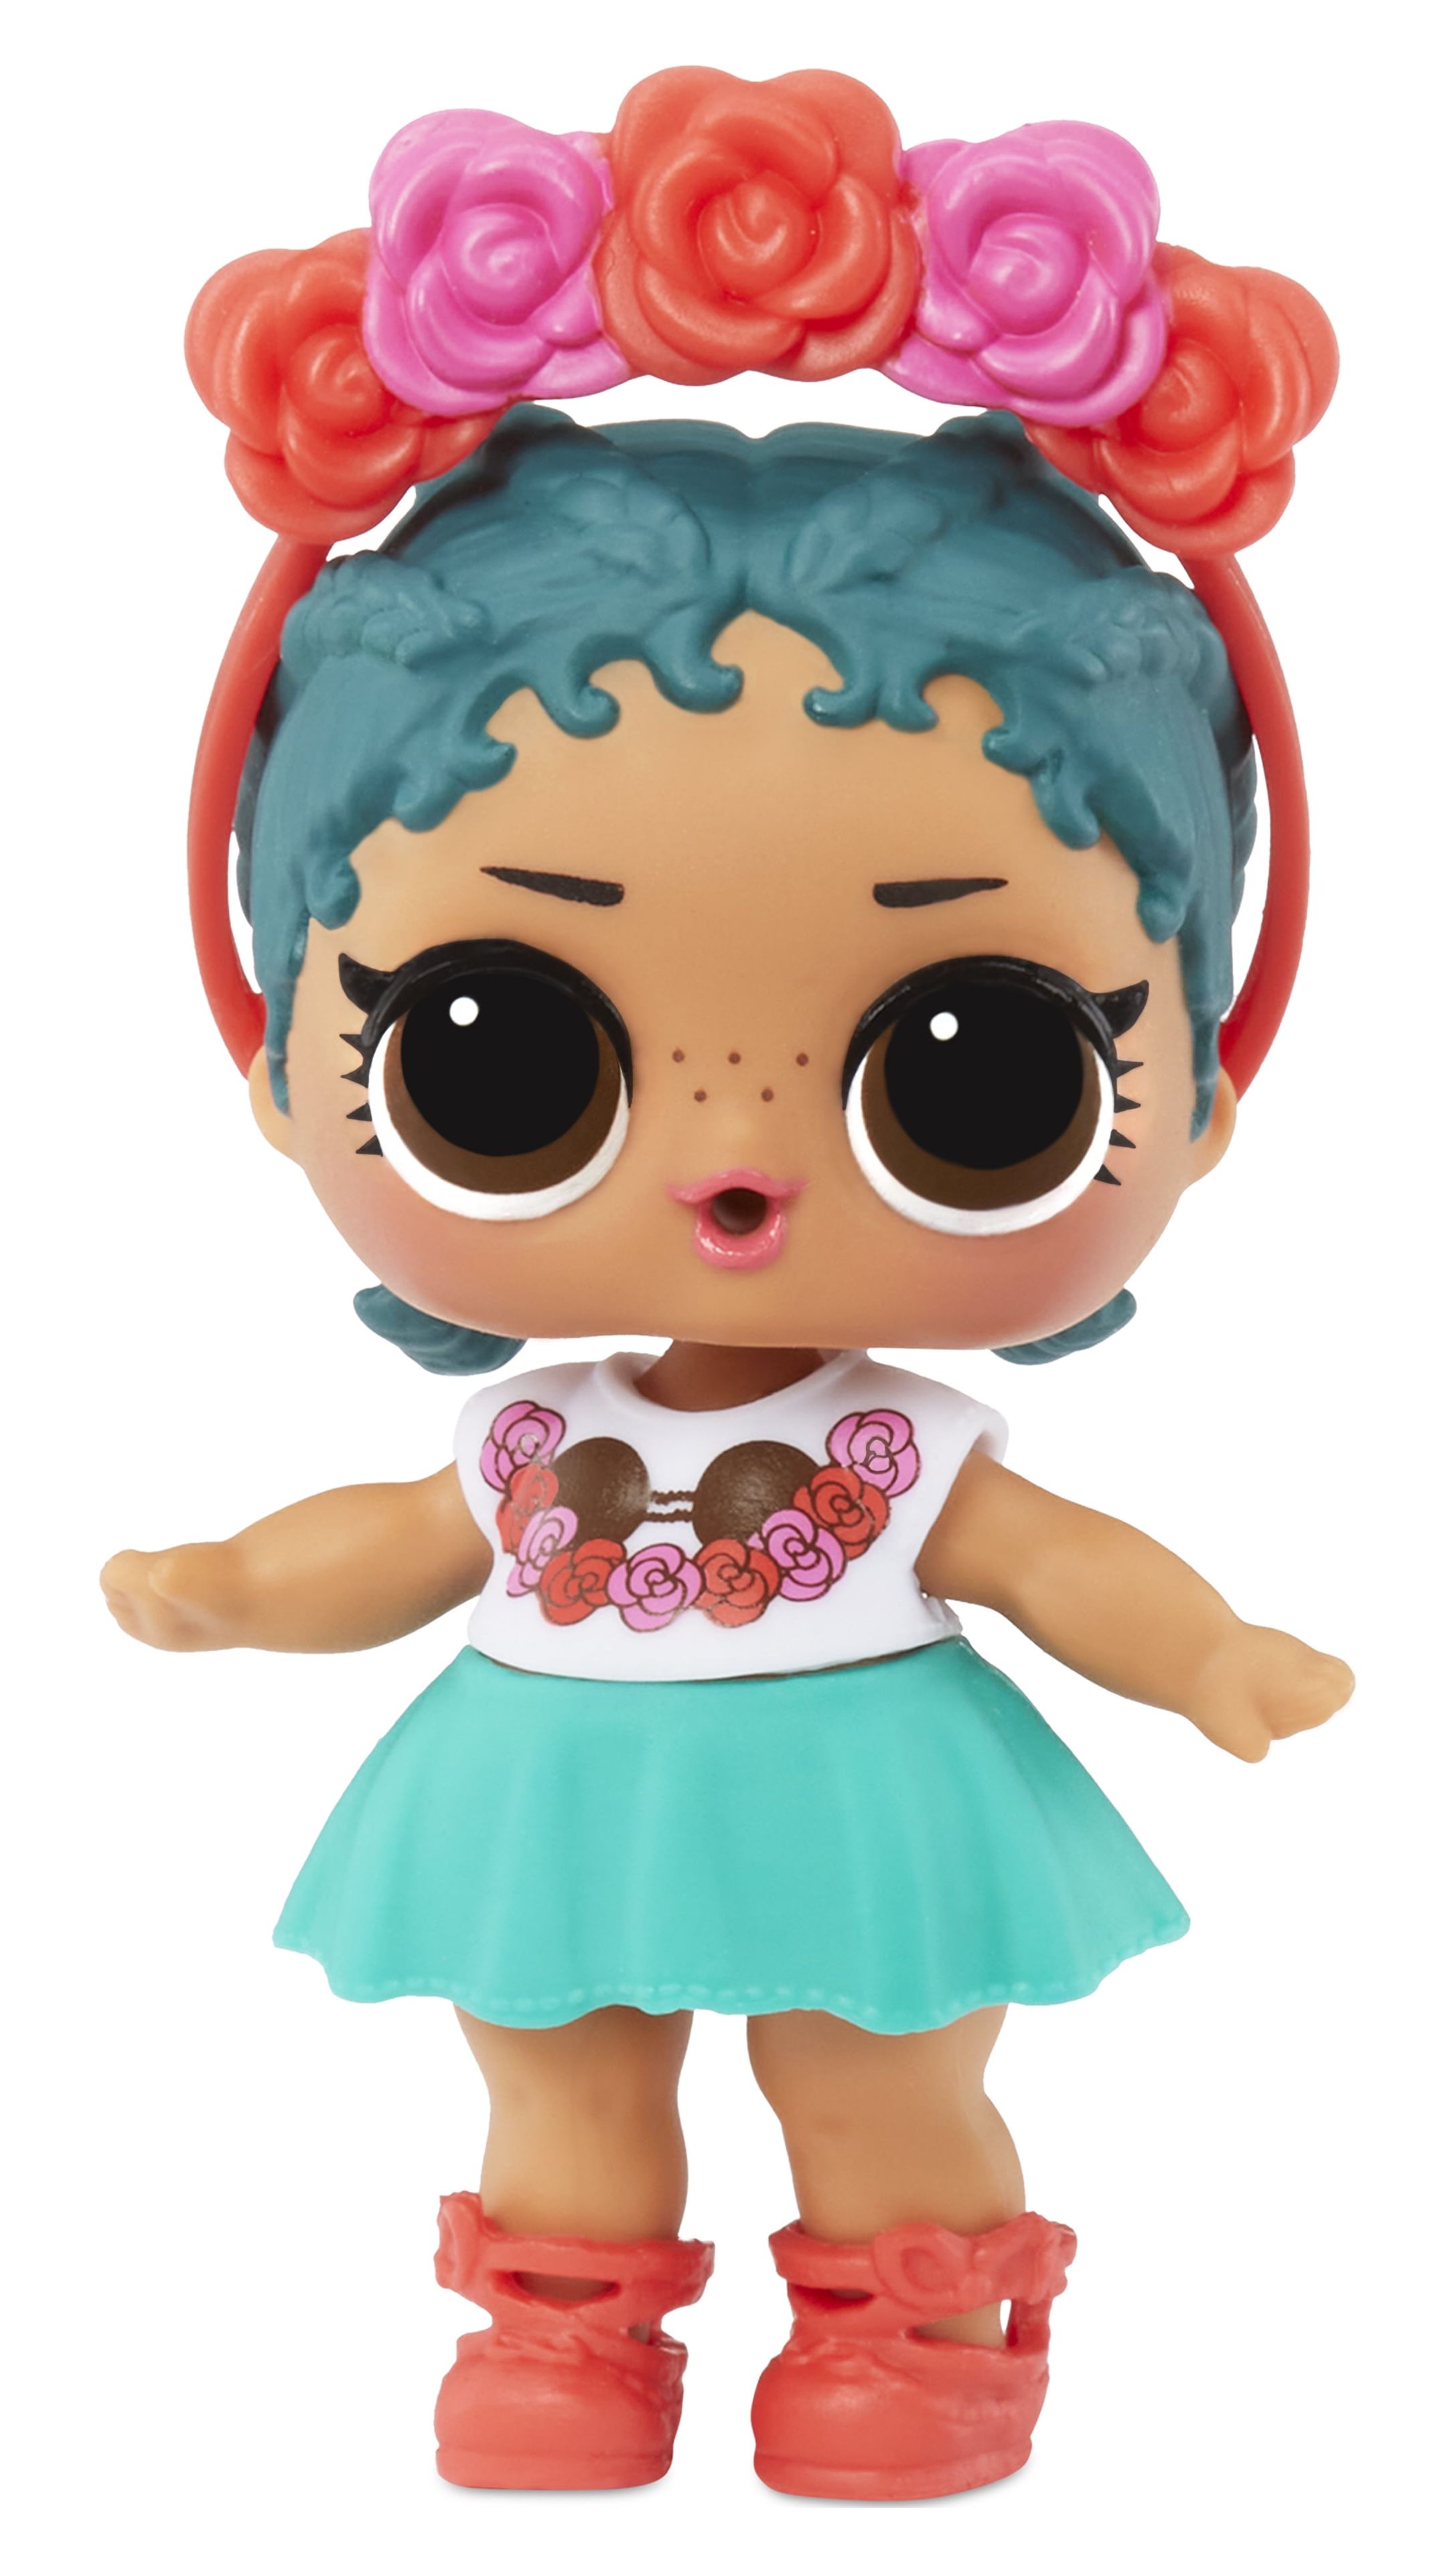 LOL Surprise World Travel™ Dolls with 8 Surprises Including Doll, Fashions, and Travel Themed Accessories - Great Gift for Girls Age 4+ - image 1 of 7